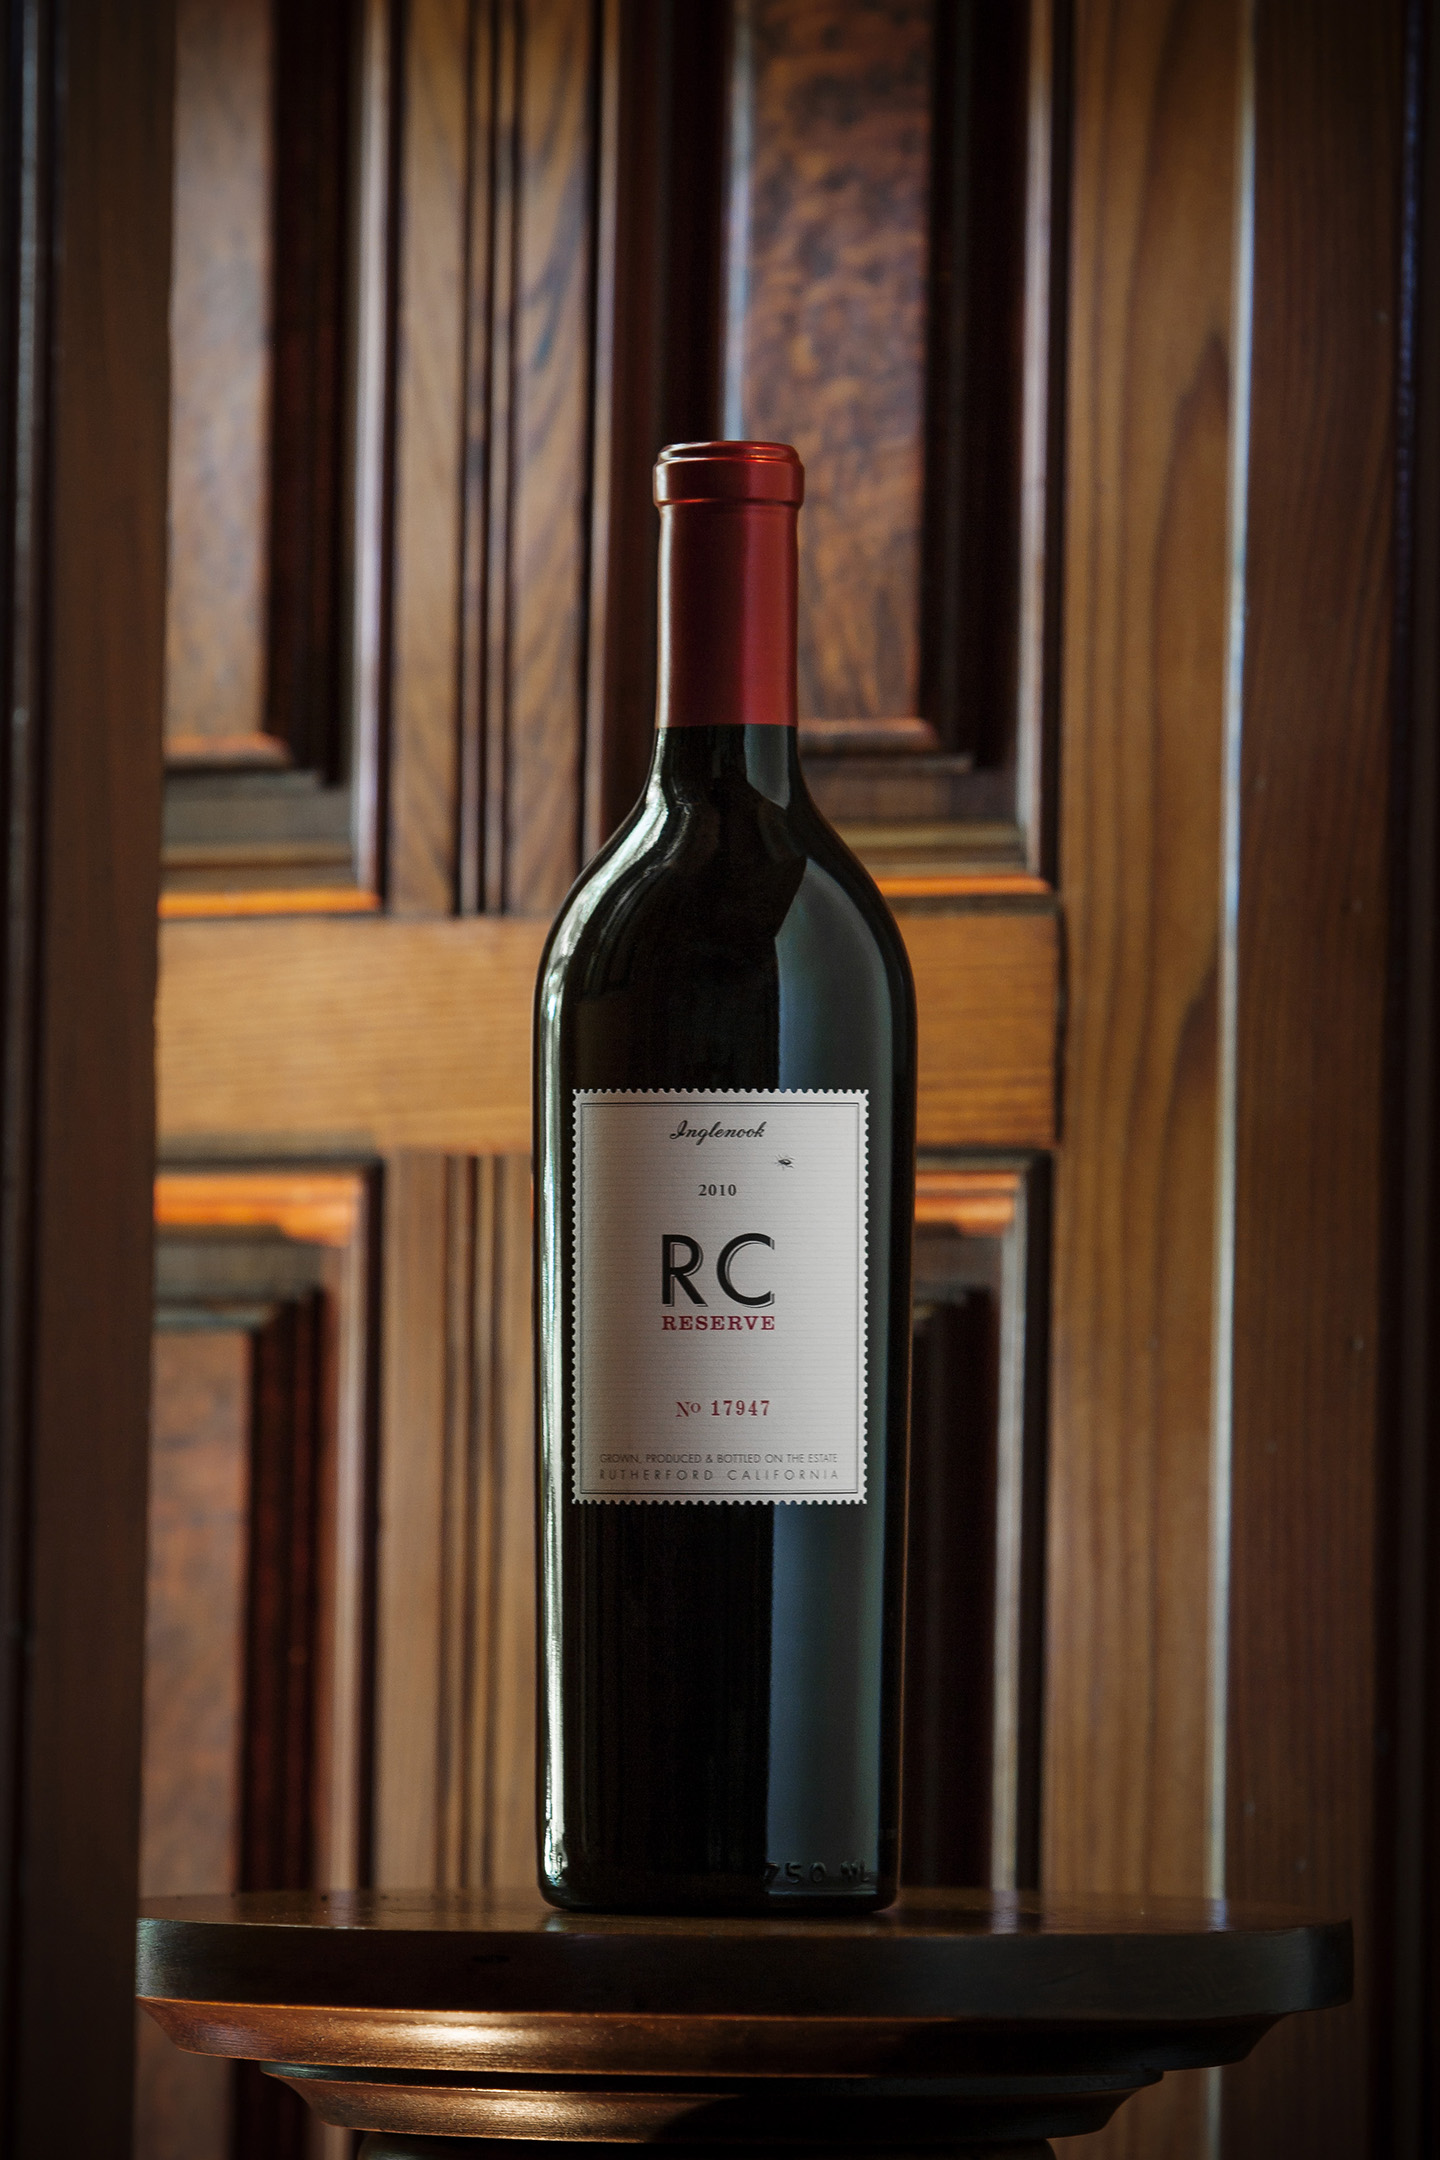 A bottle of RC Syrah sitting on a shelf against wooden paneling